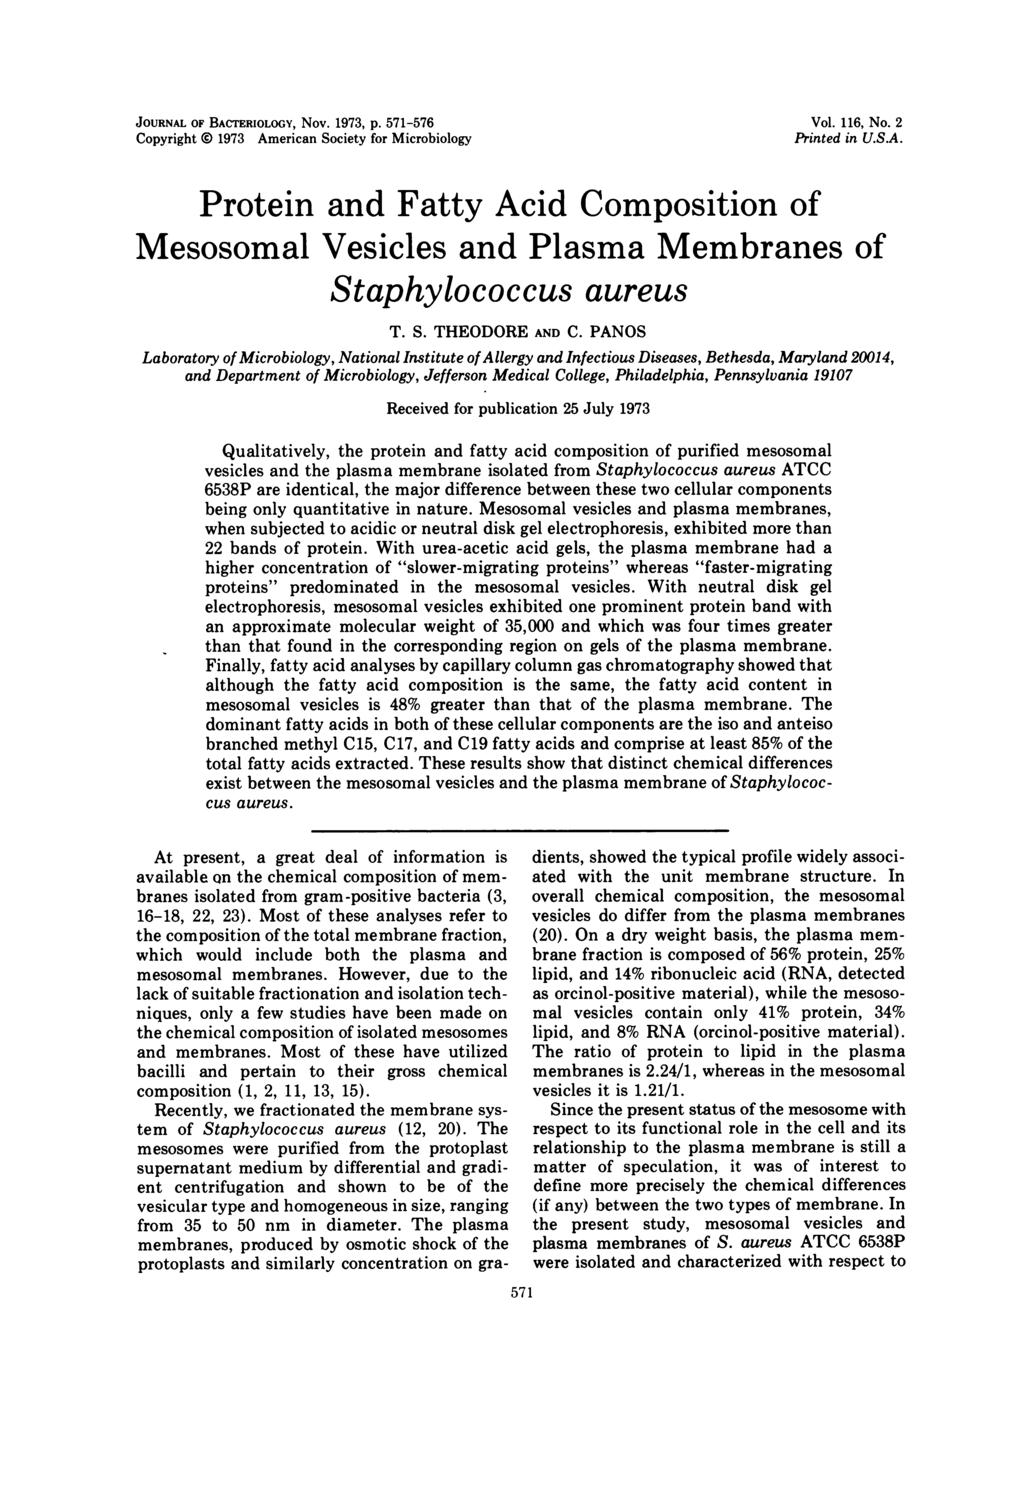 JOURNAL OF BACTERIOLOGY, Nov. 1973, p. 571-576 Copyright 0 1973 American Society for Microbiology Vol. 116, No. 2 Printed in U.S.A. Protein and Fatty Acid Composition of Mesosomal Vesicles and Plasma Membranes of Staphylococcus aureus T.